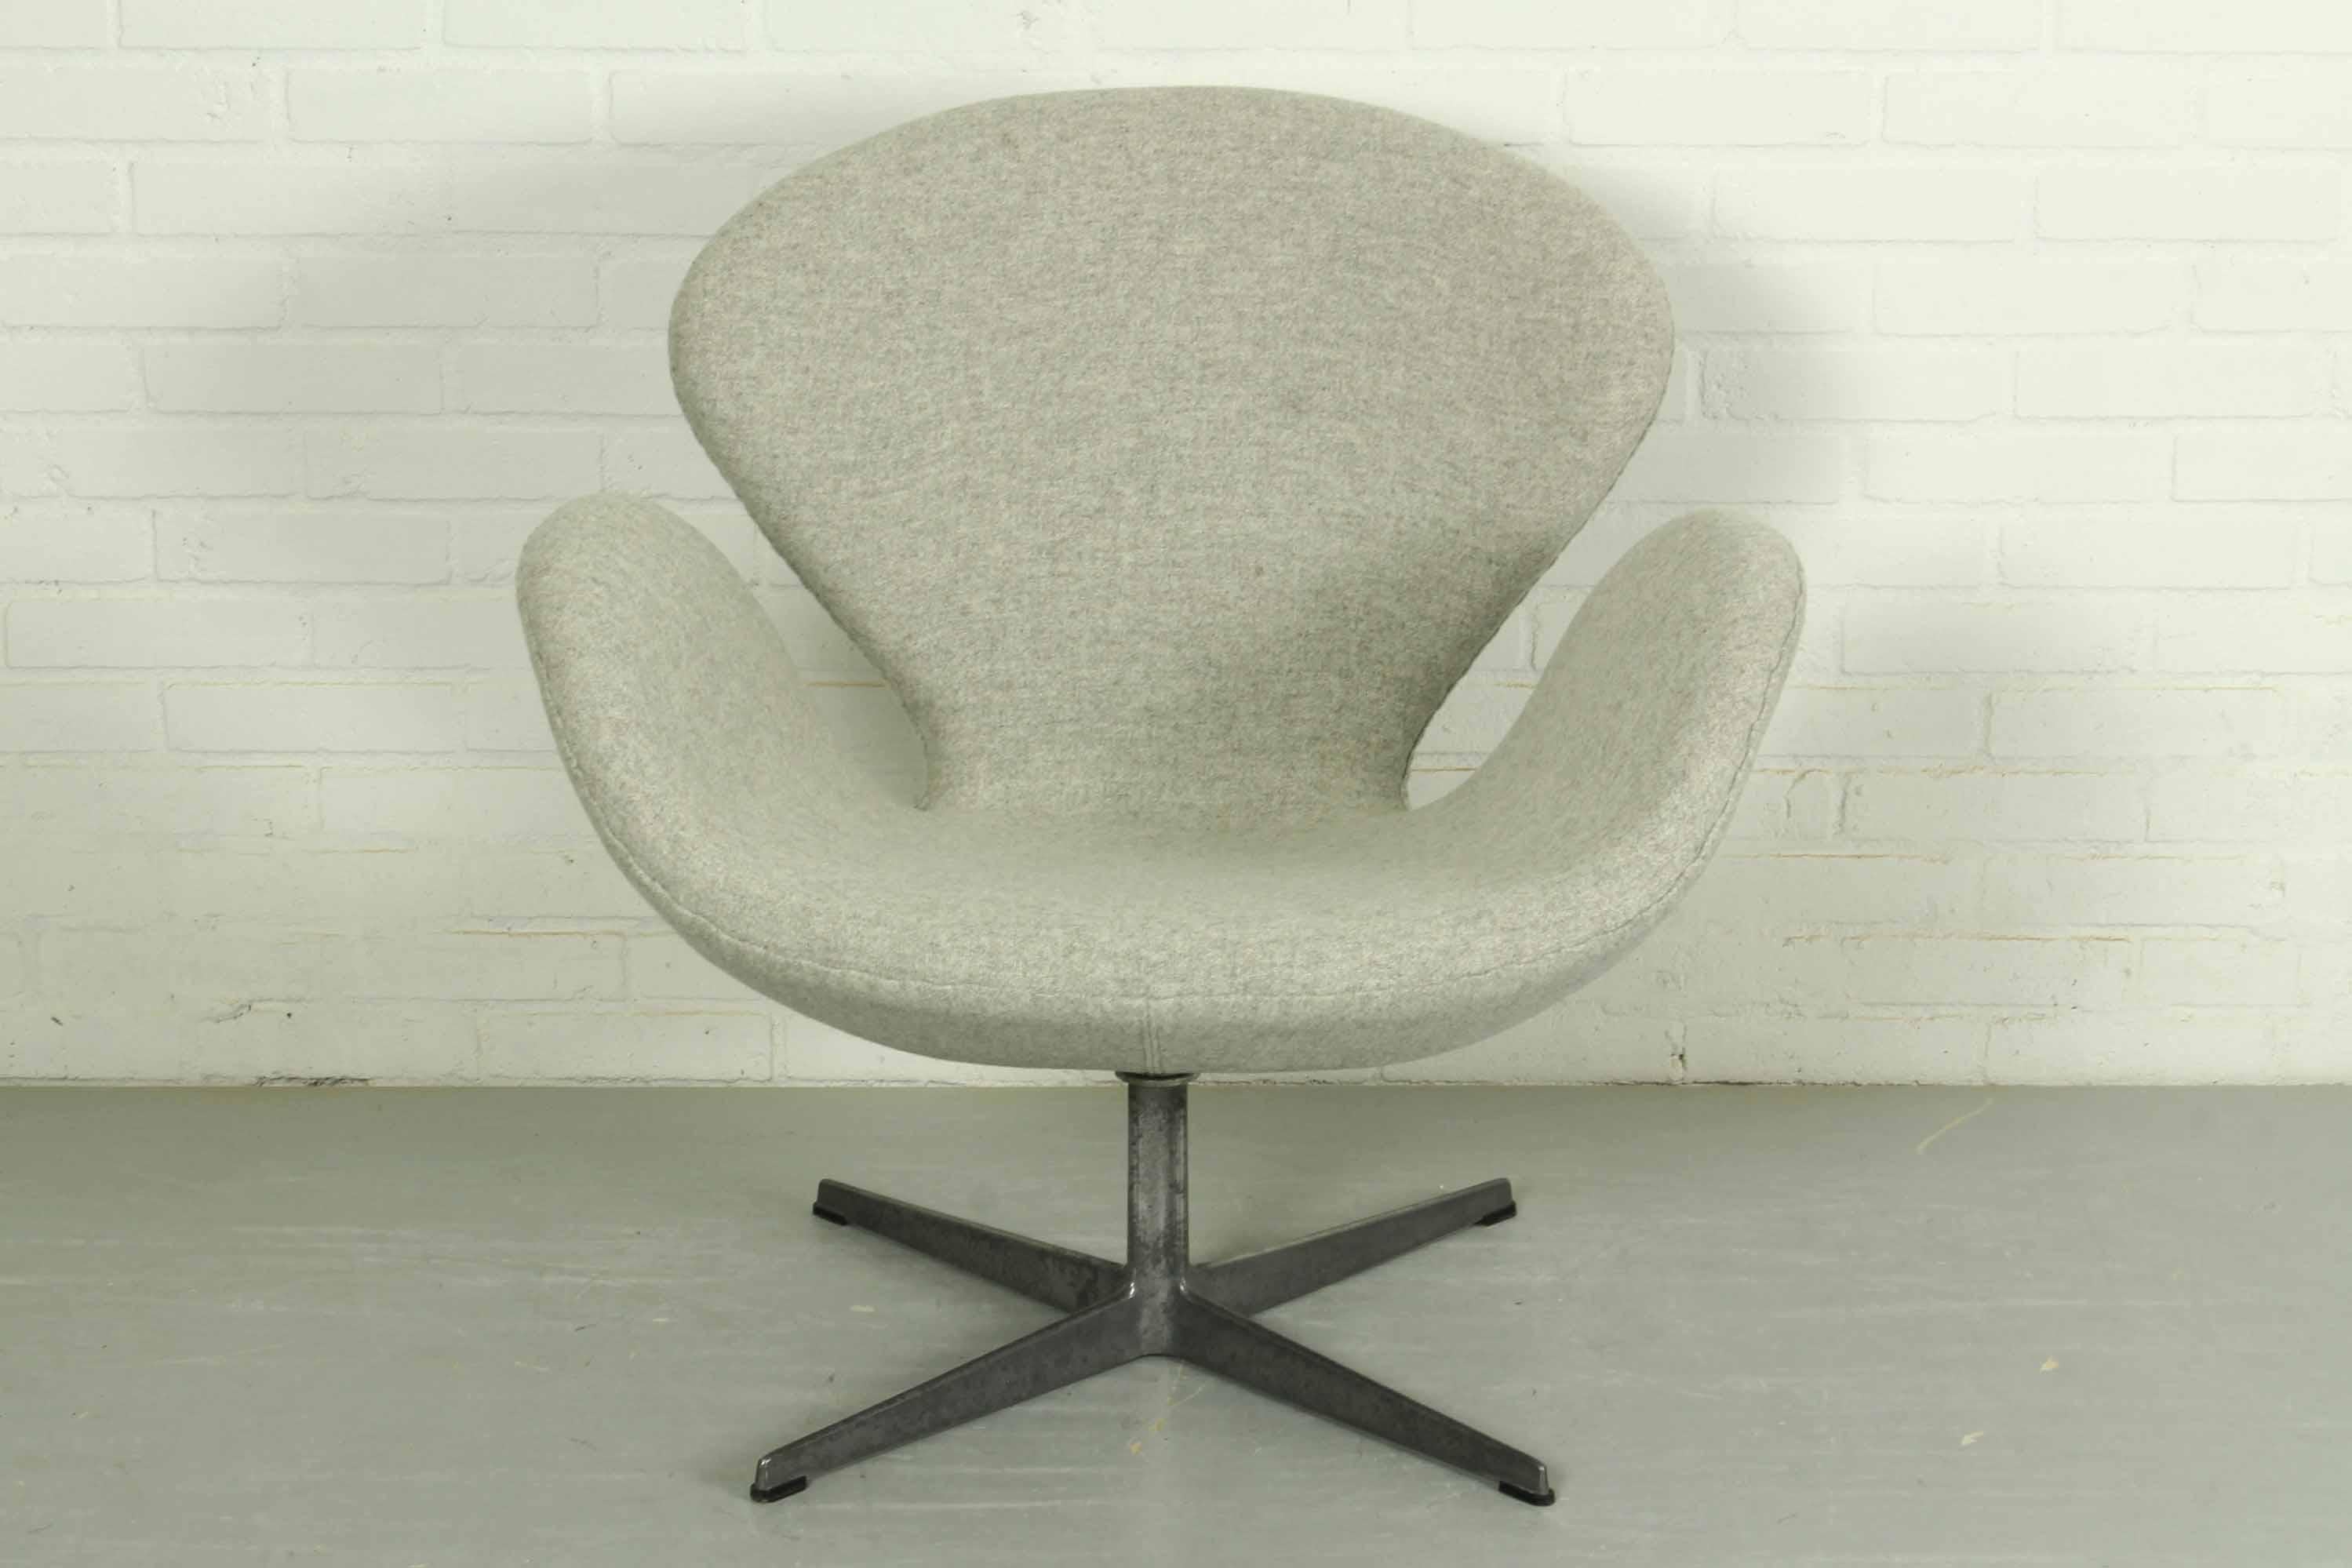 1960s Swan chair designed by Arne Jacobsen for Fritz Hansen. With brushed aluminum swiveling four-star base. Nicely upholstered in Kvadrat Tonus Meadow (90% wool, 100000 Martindale abrasion). Imprint in base.